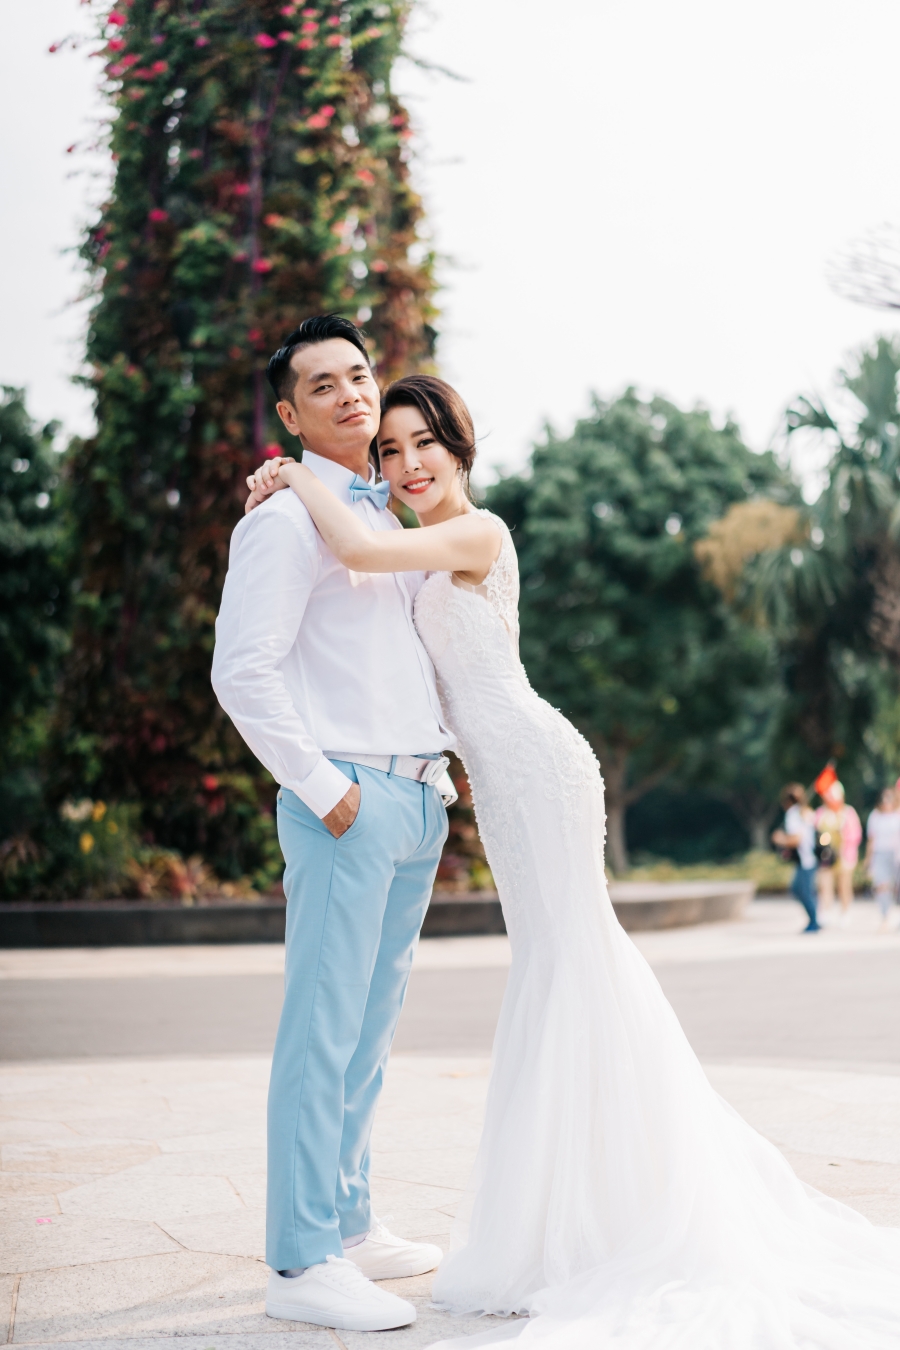 Singapore Pre-Wedding Photoshoot At Cloud Forest, Fort Canning Spiral Staircase And Marina Bay For Korean Couple  by Michael  on OneThreeOneFour 6